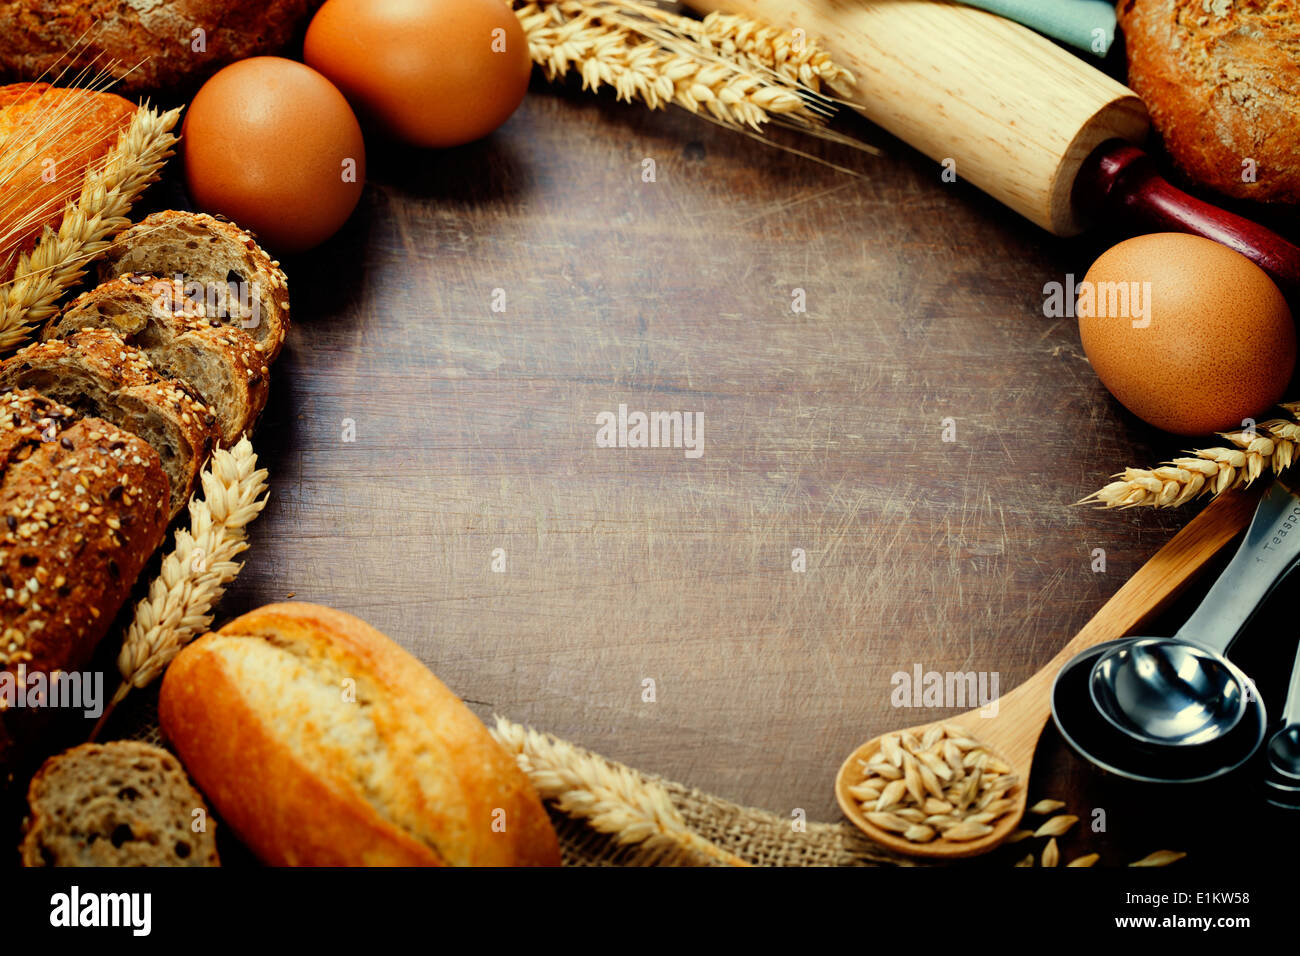 Bread and ingredients frame on wooden table Stock Photo